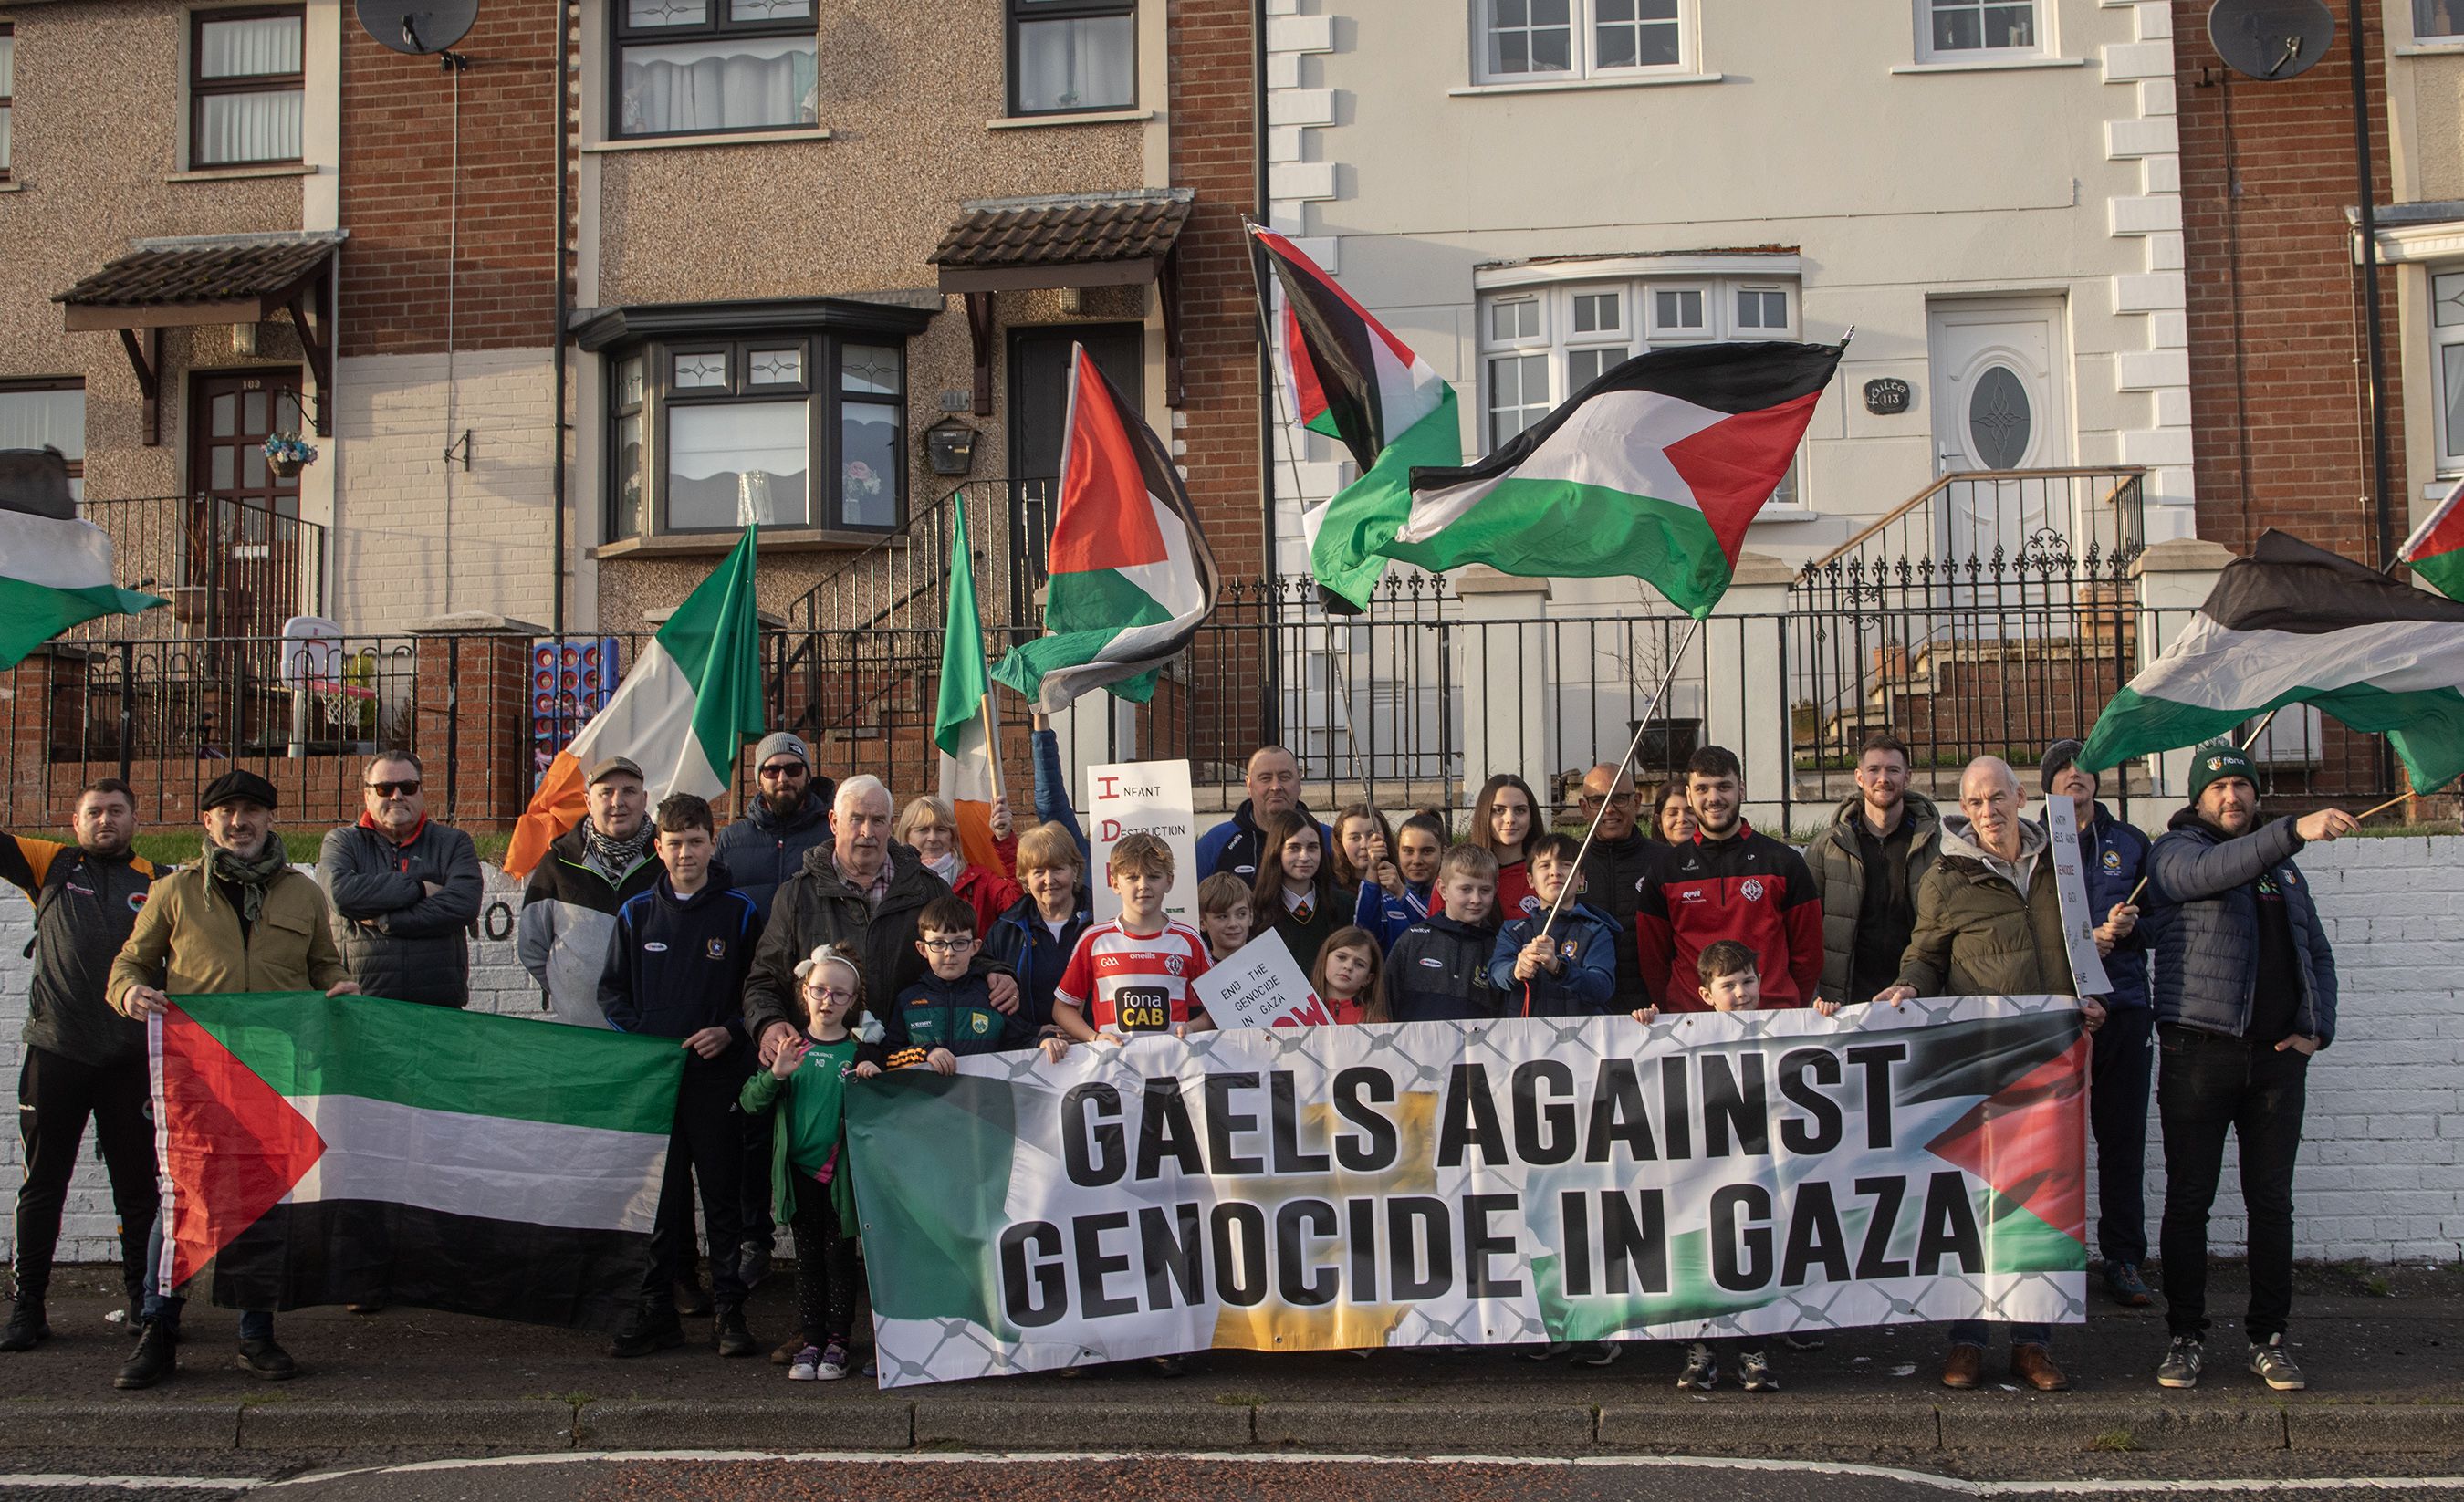 GAZA: Antrim Gaels Against Genocide in Gaza by the new mural in Lenadoon which highlight\'s Saturday\'s upcoming march